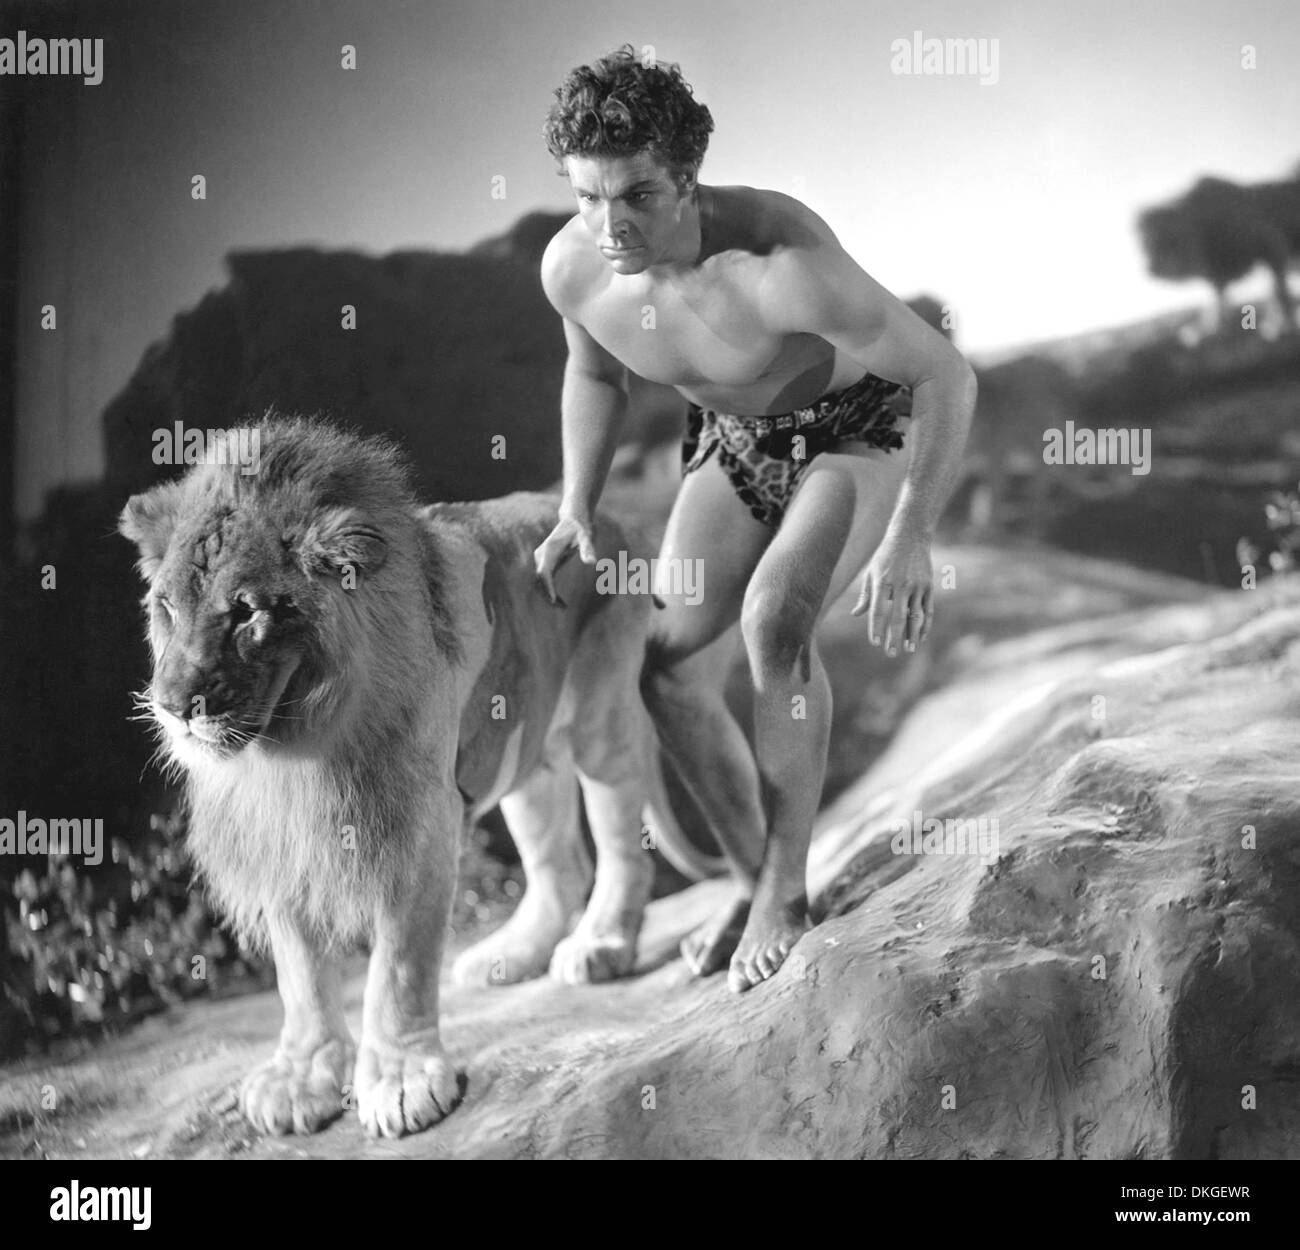 KING OF THE JUNGLE 1933 Paramount Pictures film with Buster Crabbe Stock Photo